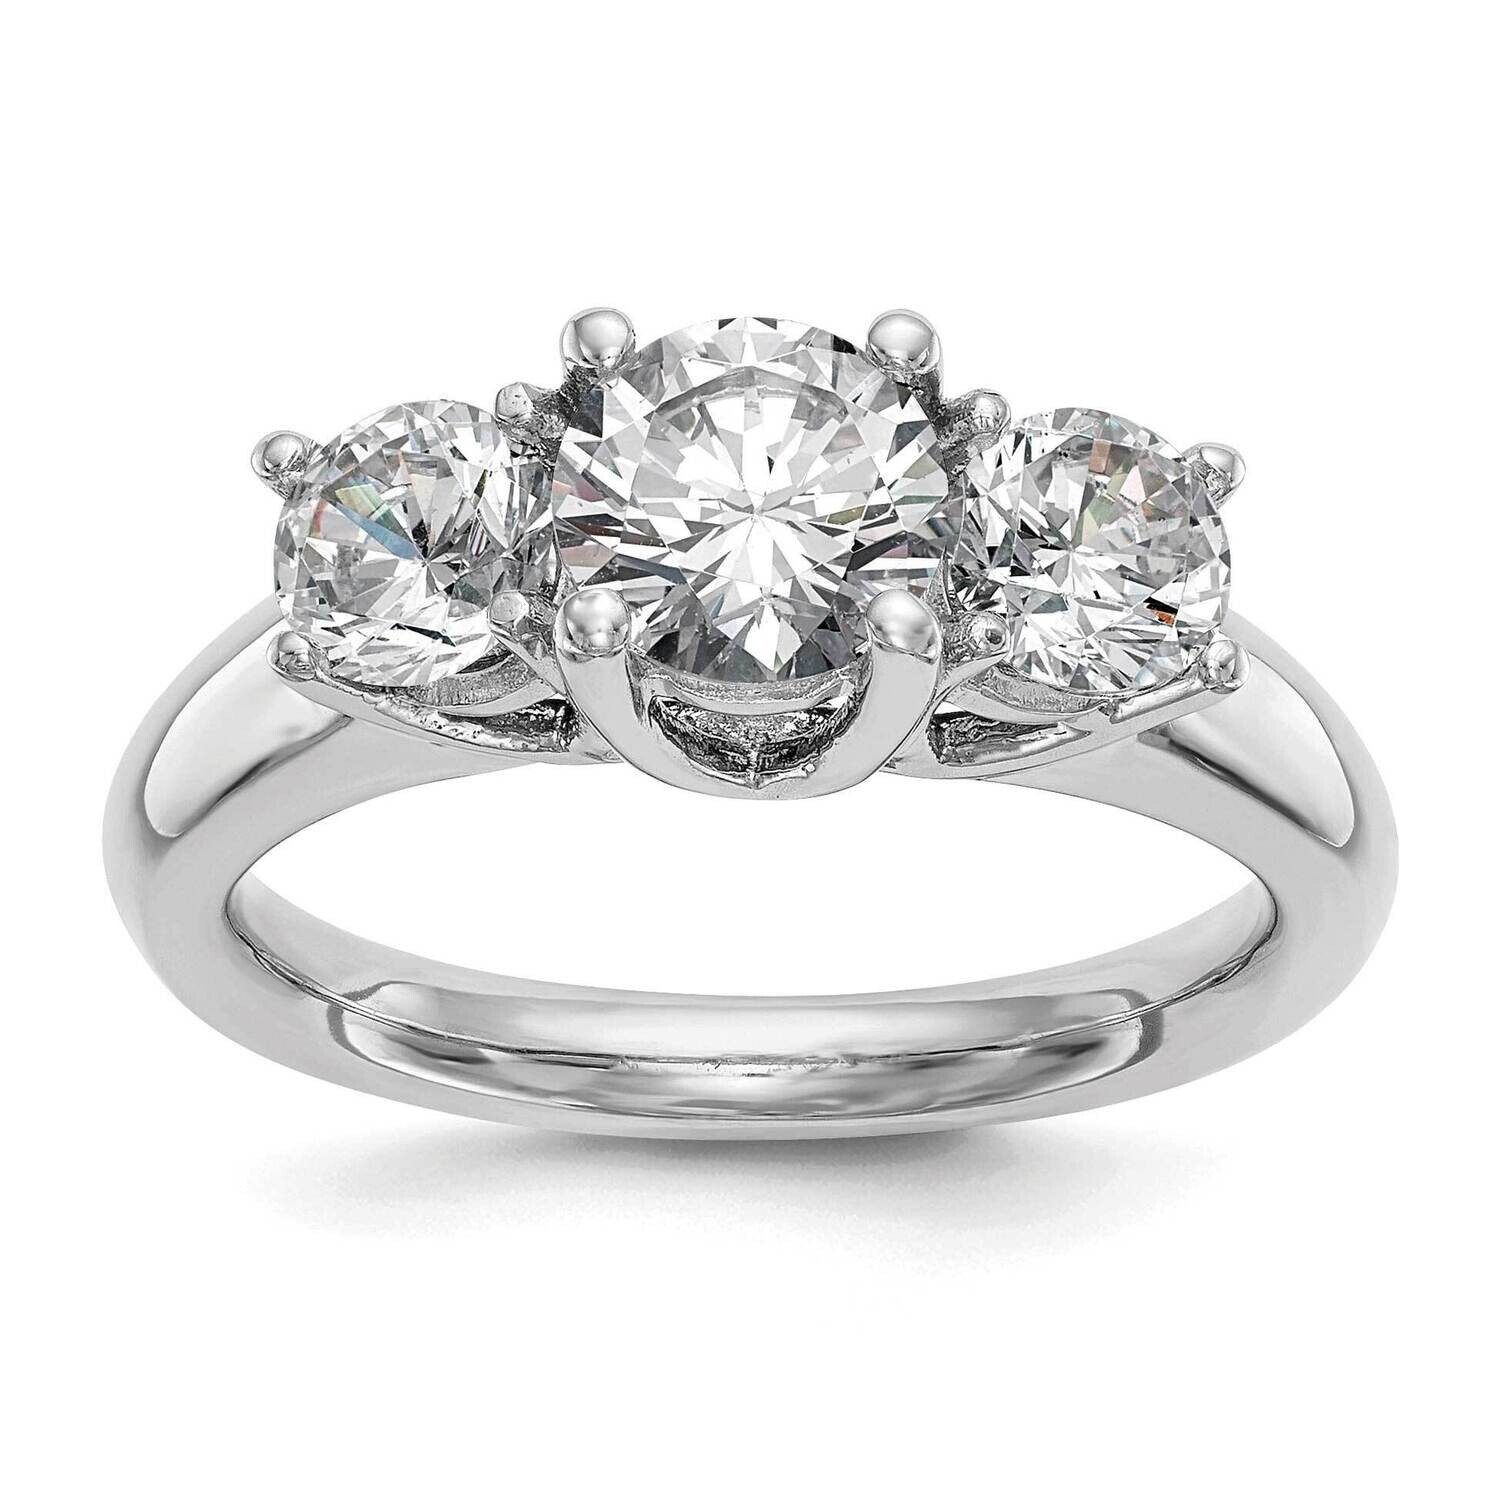 3-Stone Holds 1 Carat 6.5mm Round Center 2-5.2mm Round Sides Engagement Ring Mounting 14k White Gold RM2946E-100-CWAA